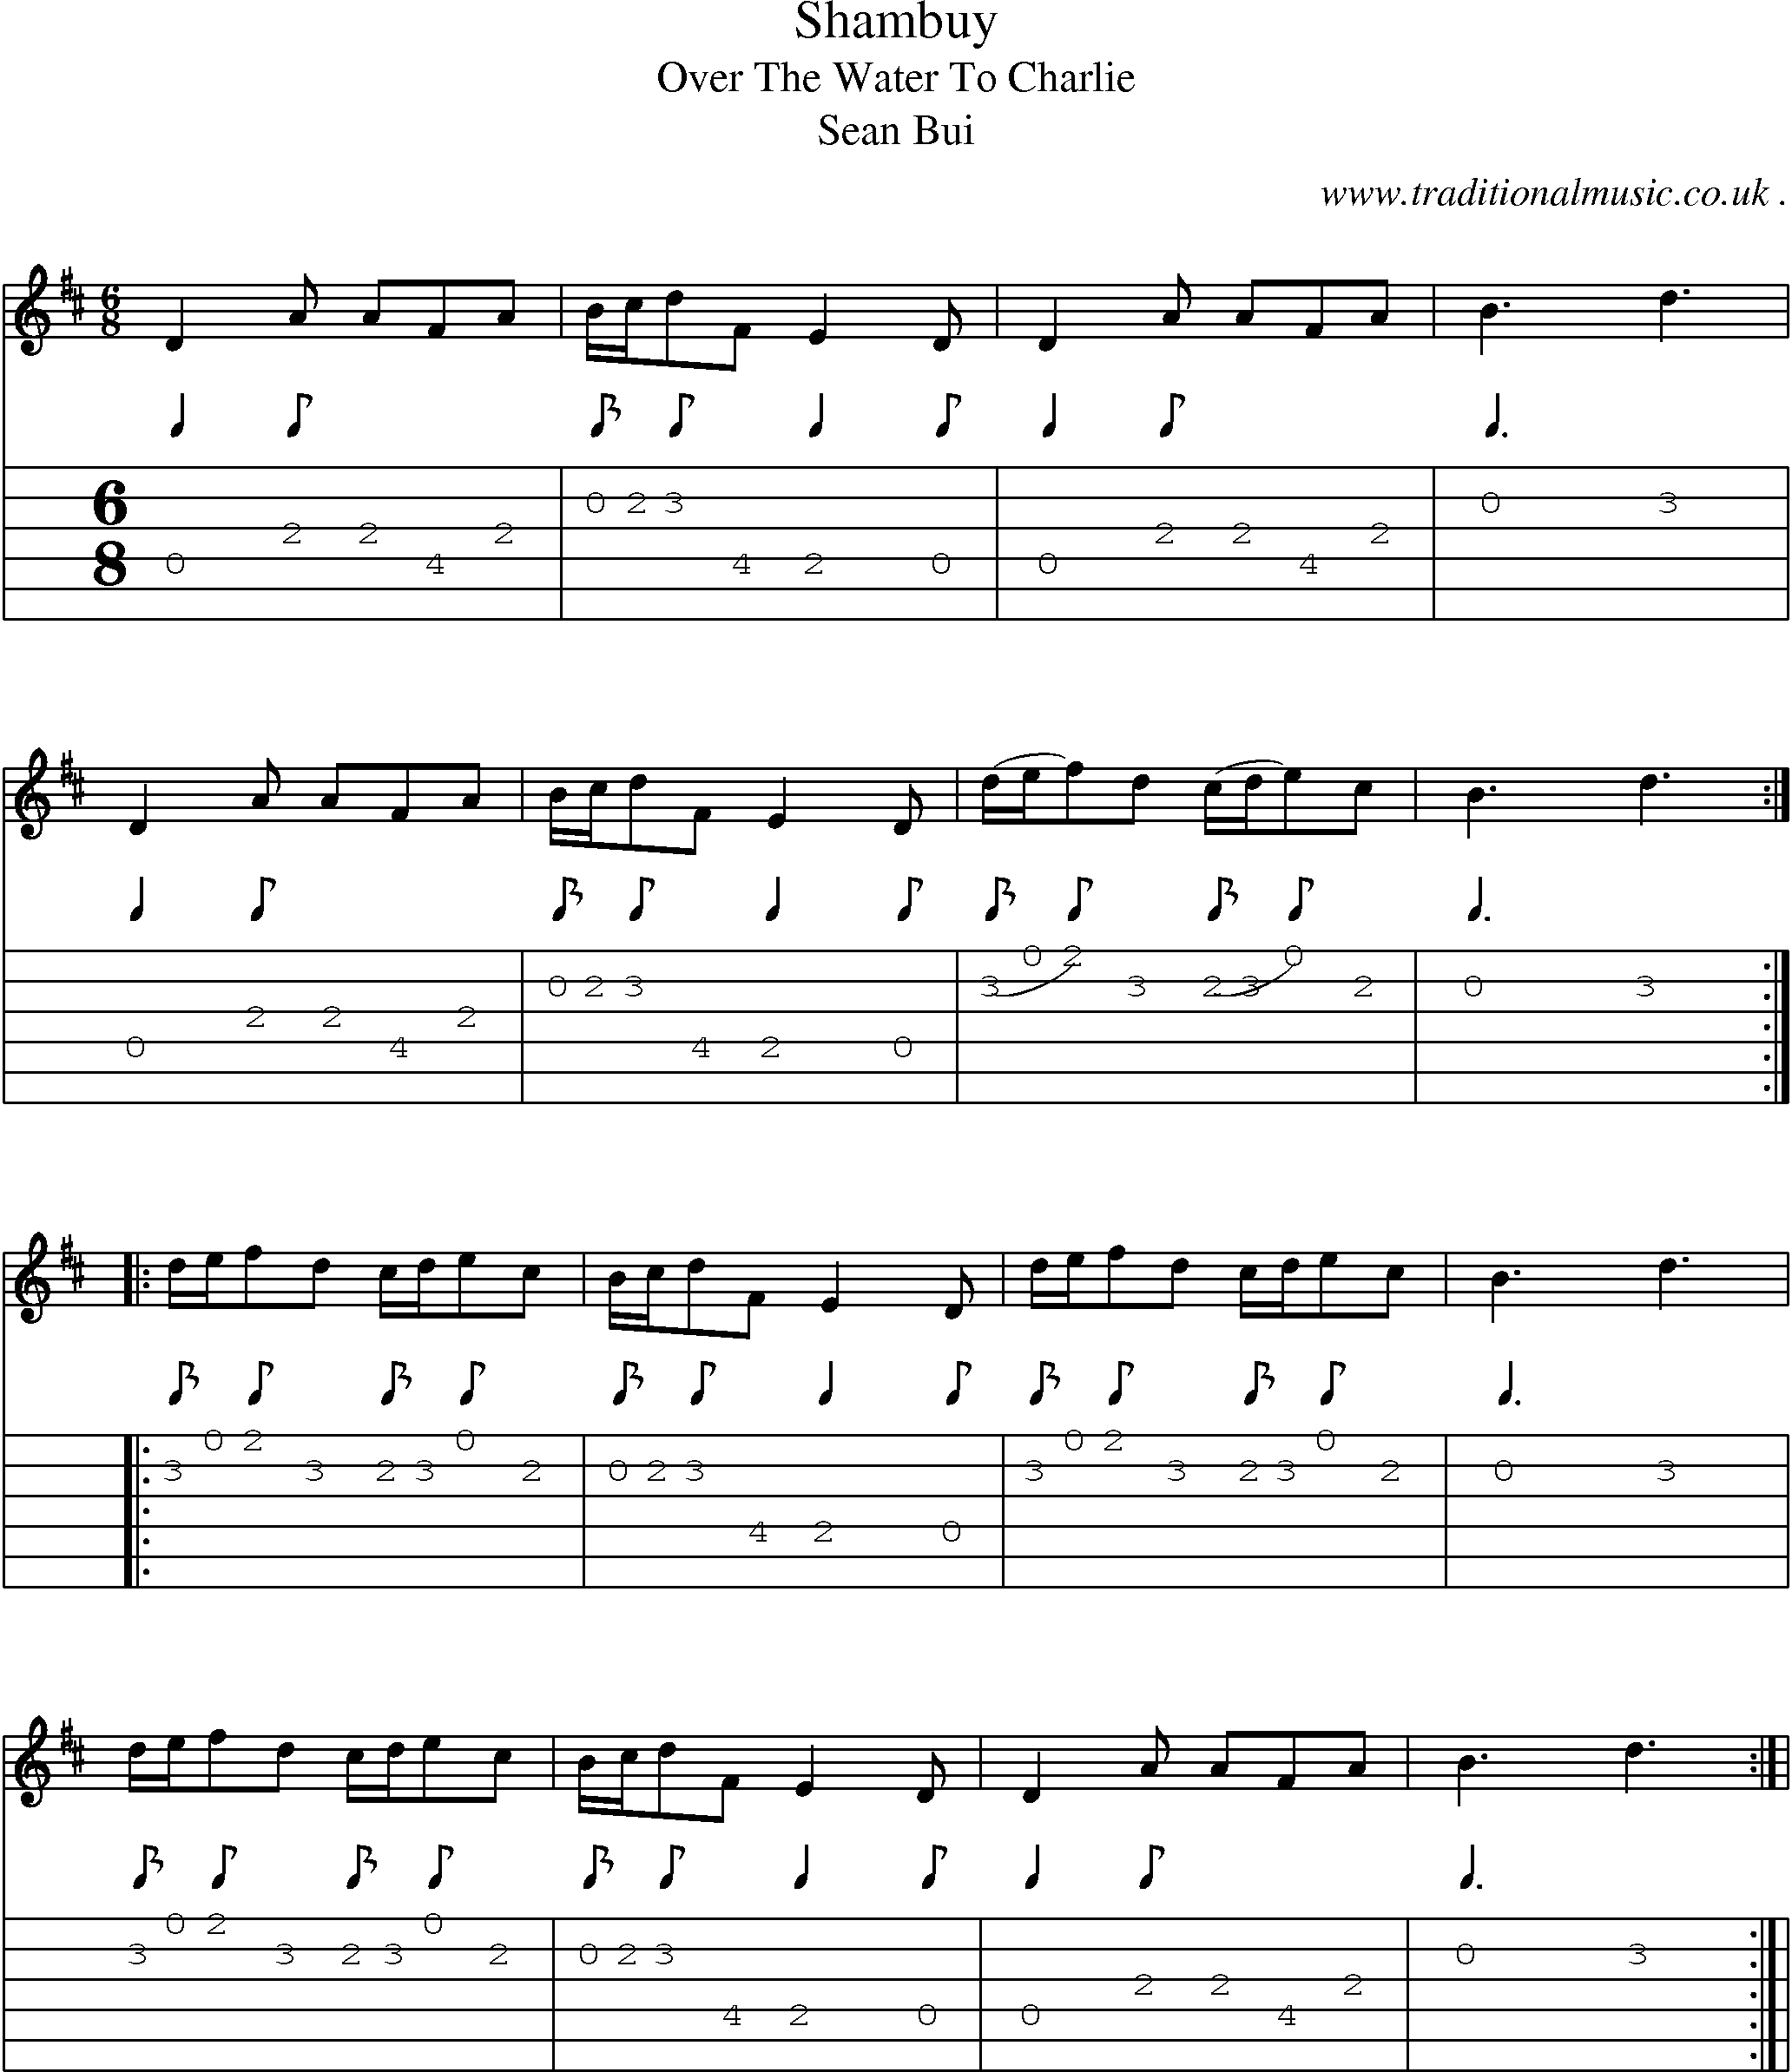 Sheet-Music and Guitar Tabs for Shambuy